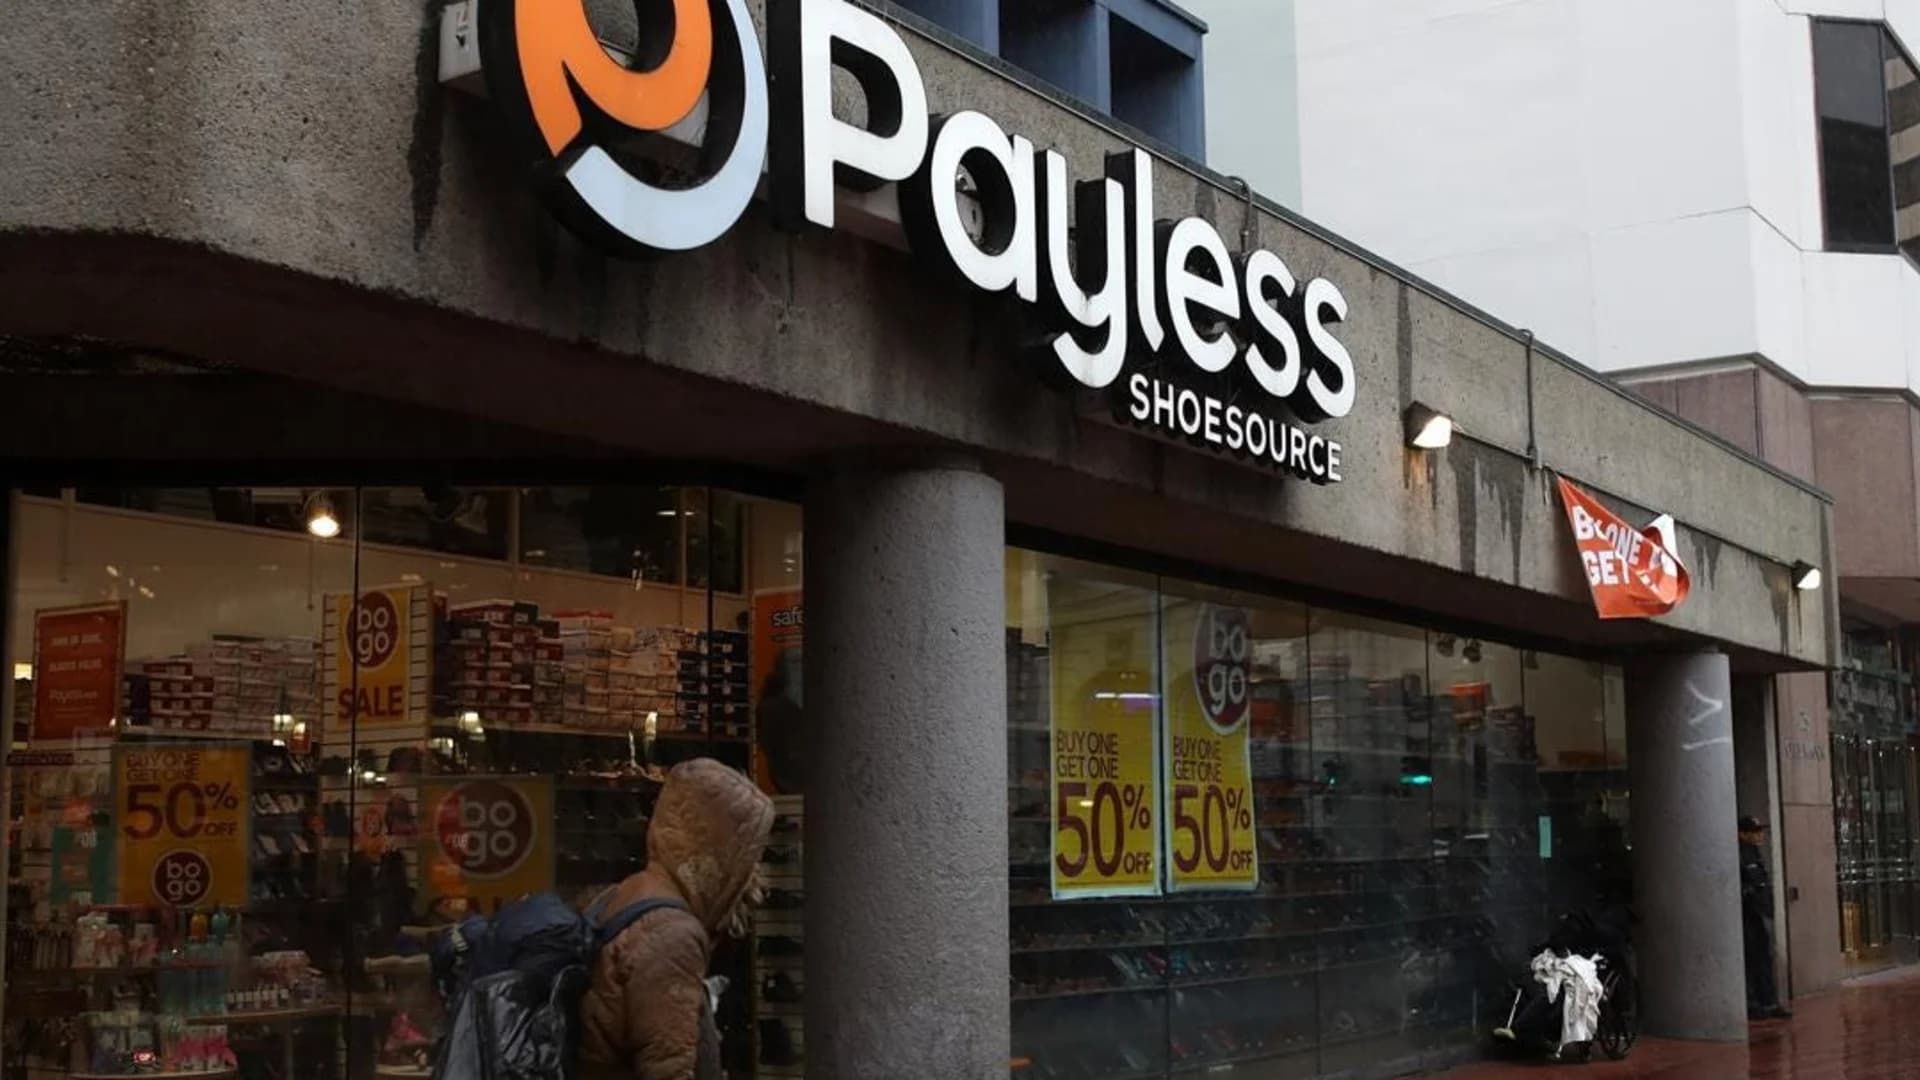 All 24 New Jersey Payless ShoeSource stores to close